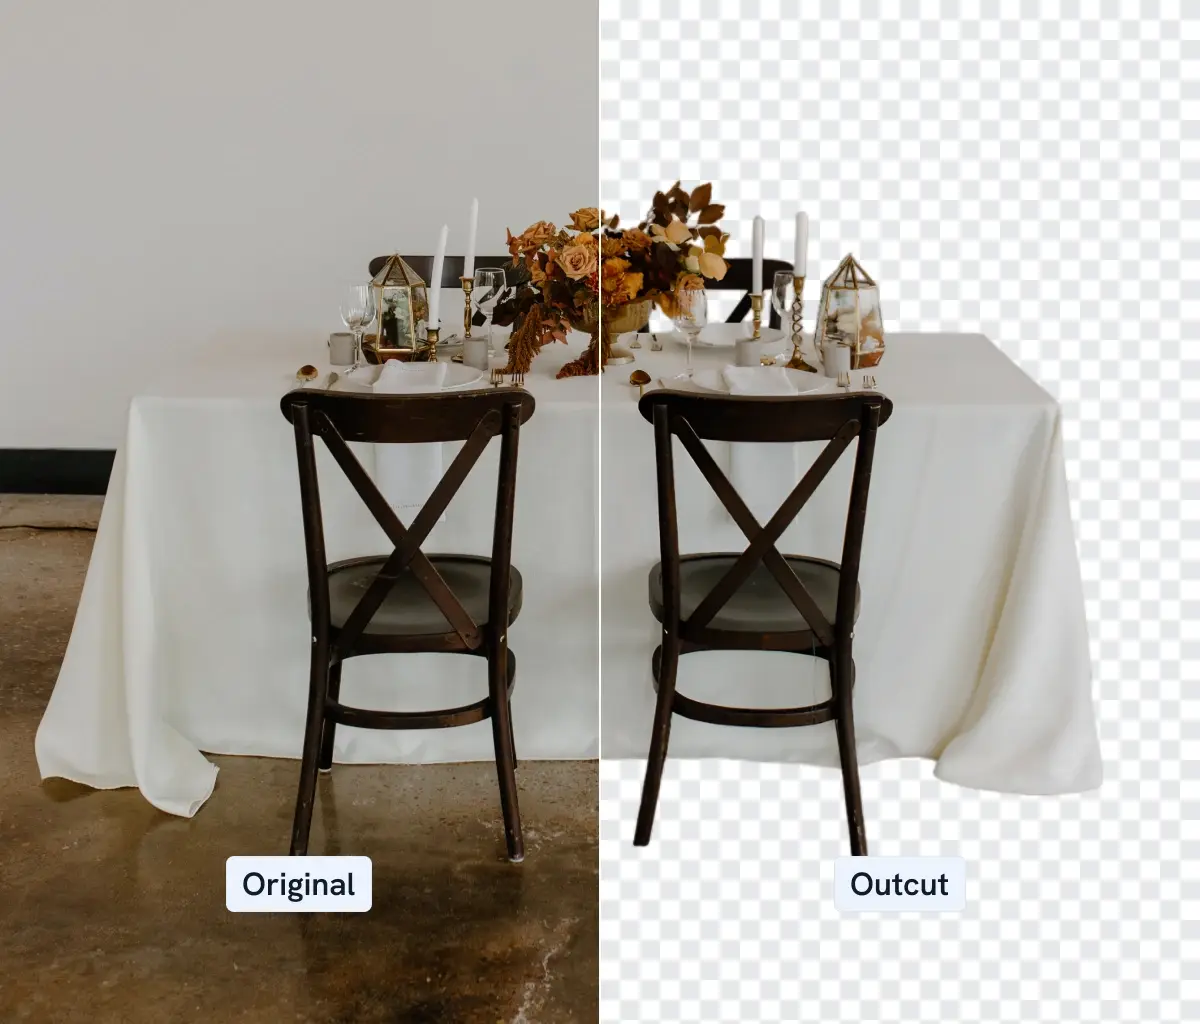 An image displaying home furniture with the background removed through editing.